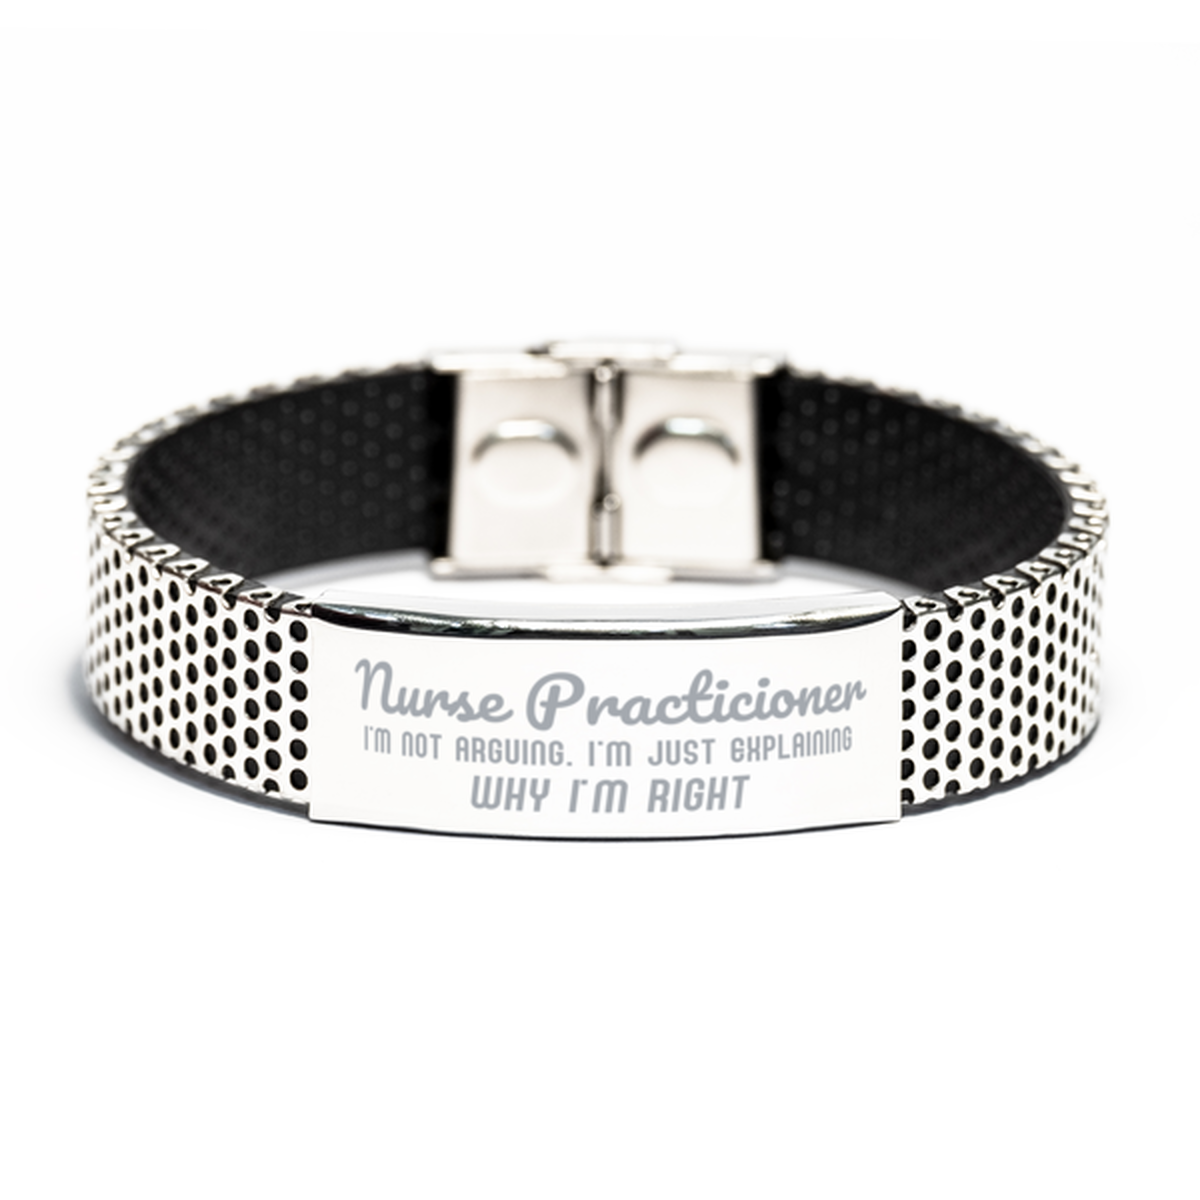 Nurse Practicioner I'm not Arguing. I'm Just Explaining Why I'm RIGHT Stainless Steel Bracelet, Funny Saying Quote Nurse Practicioner Gifts For Nurse Practicioner Graduation Birthday Christmas Gifts for Men Women Coworker